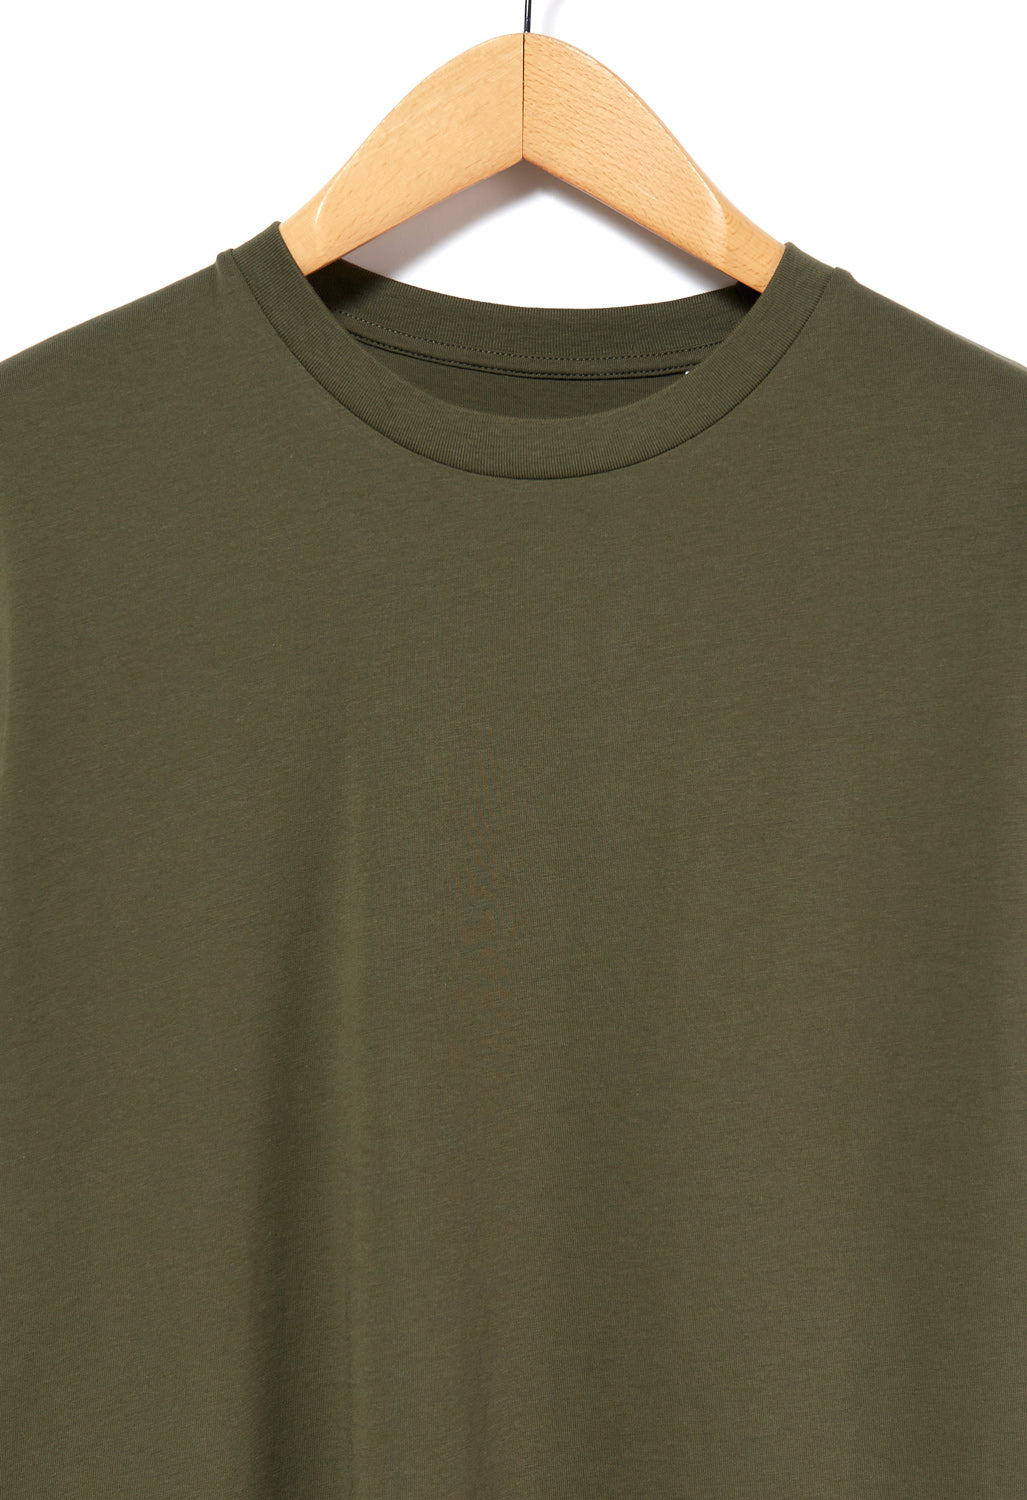 Steep Learning Group Soft Rock Tee - Olive